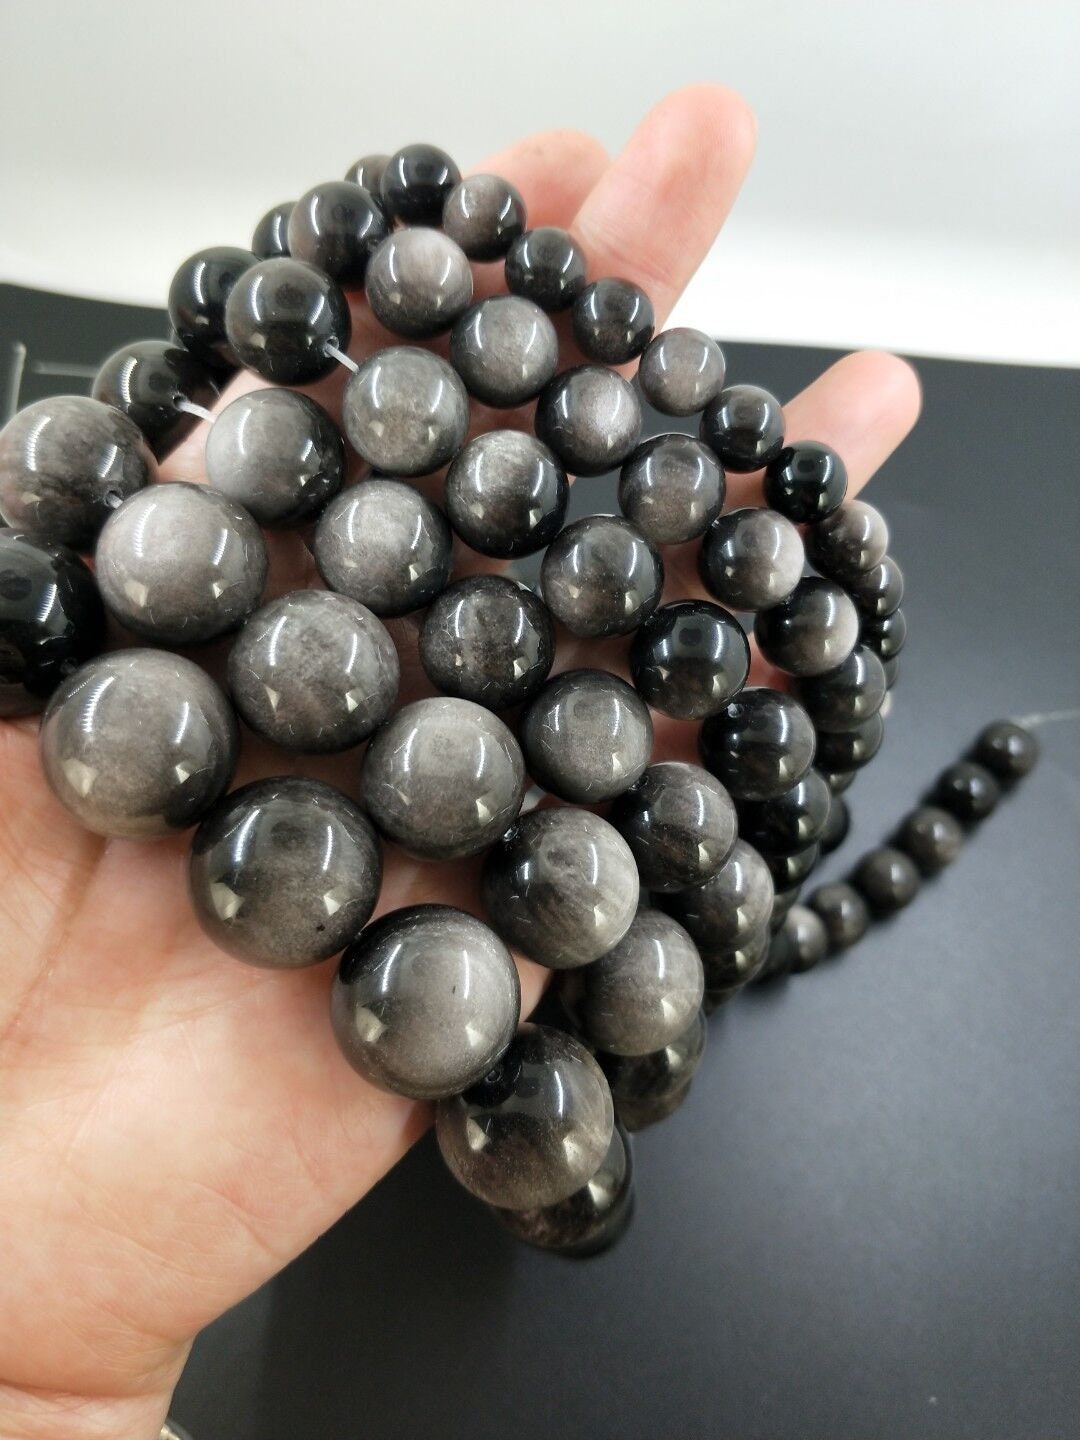 Thebeadchest 20mm Black Lava Gemstone Beads Round Crystal Energy Stone Healing Power for Jewelry Making, 15 inch Strand, Adult Unisex, Size: 20 mm